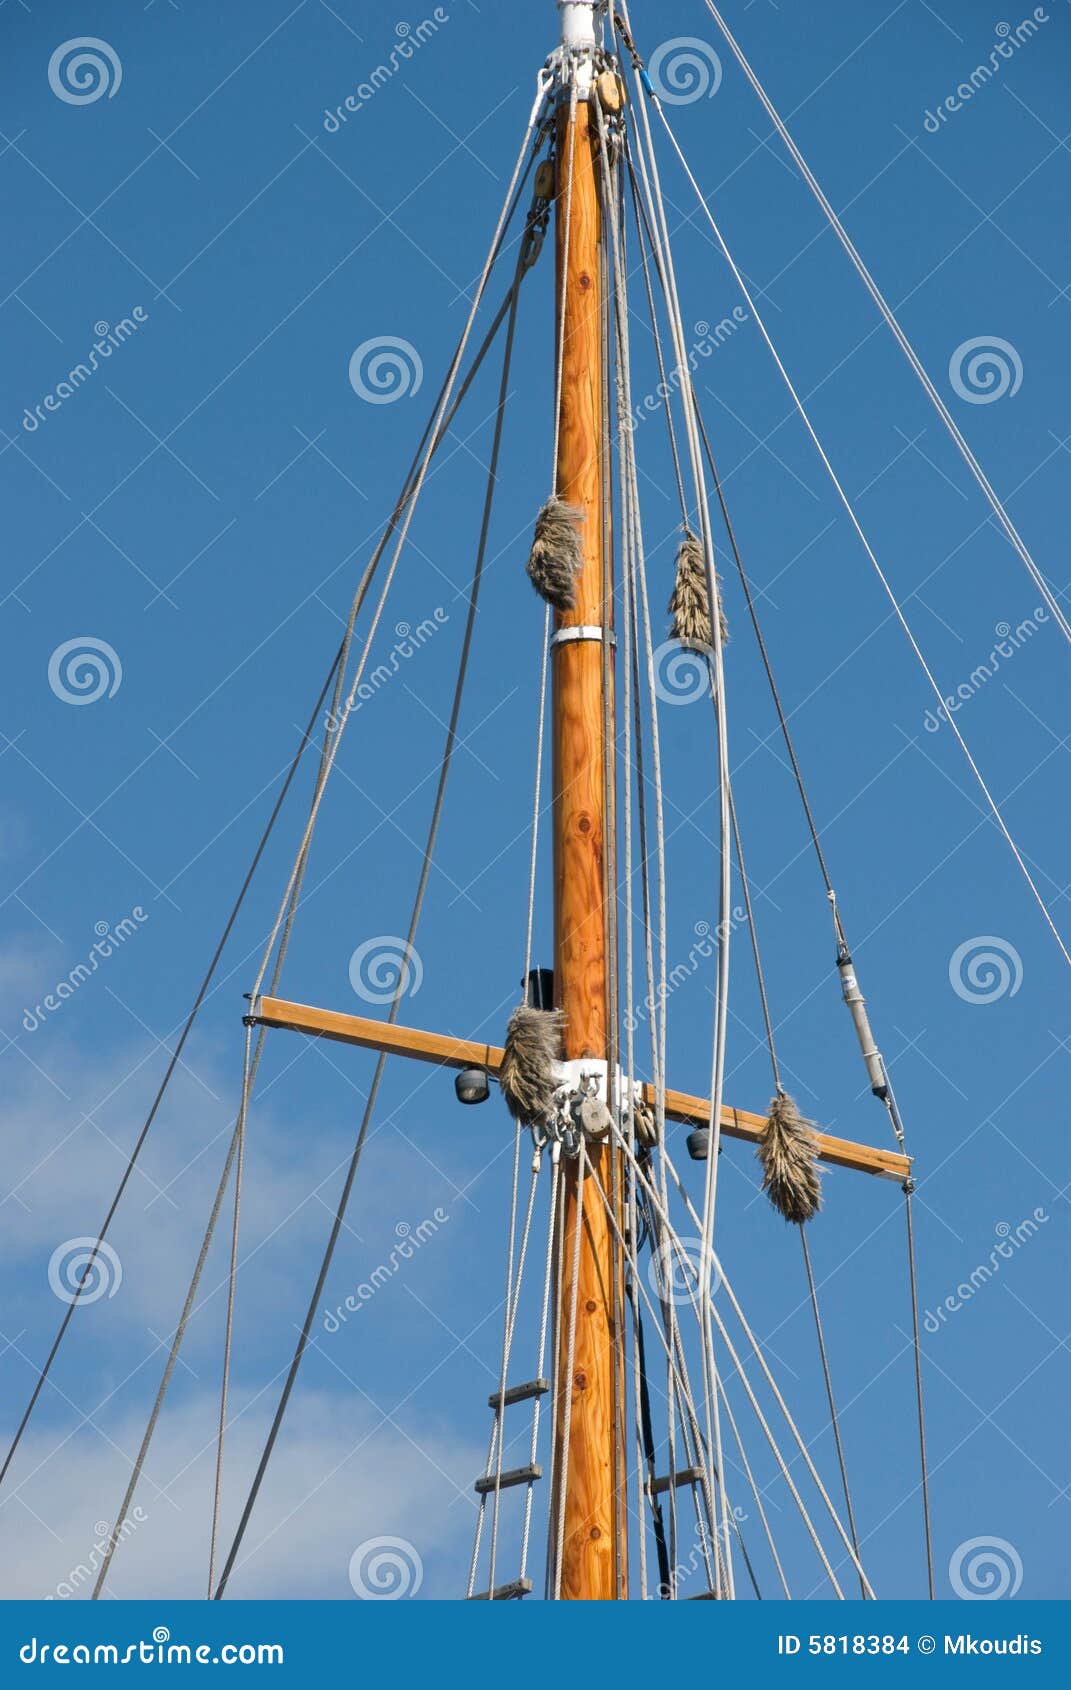 Sailing Mast stock photo. Image of strouds, rigging, ropes ...